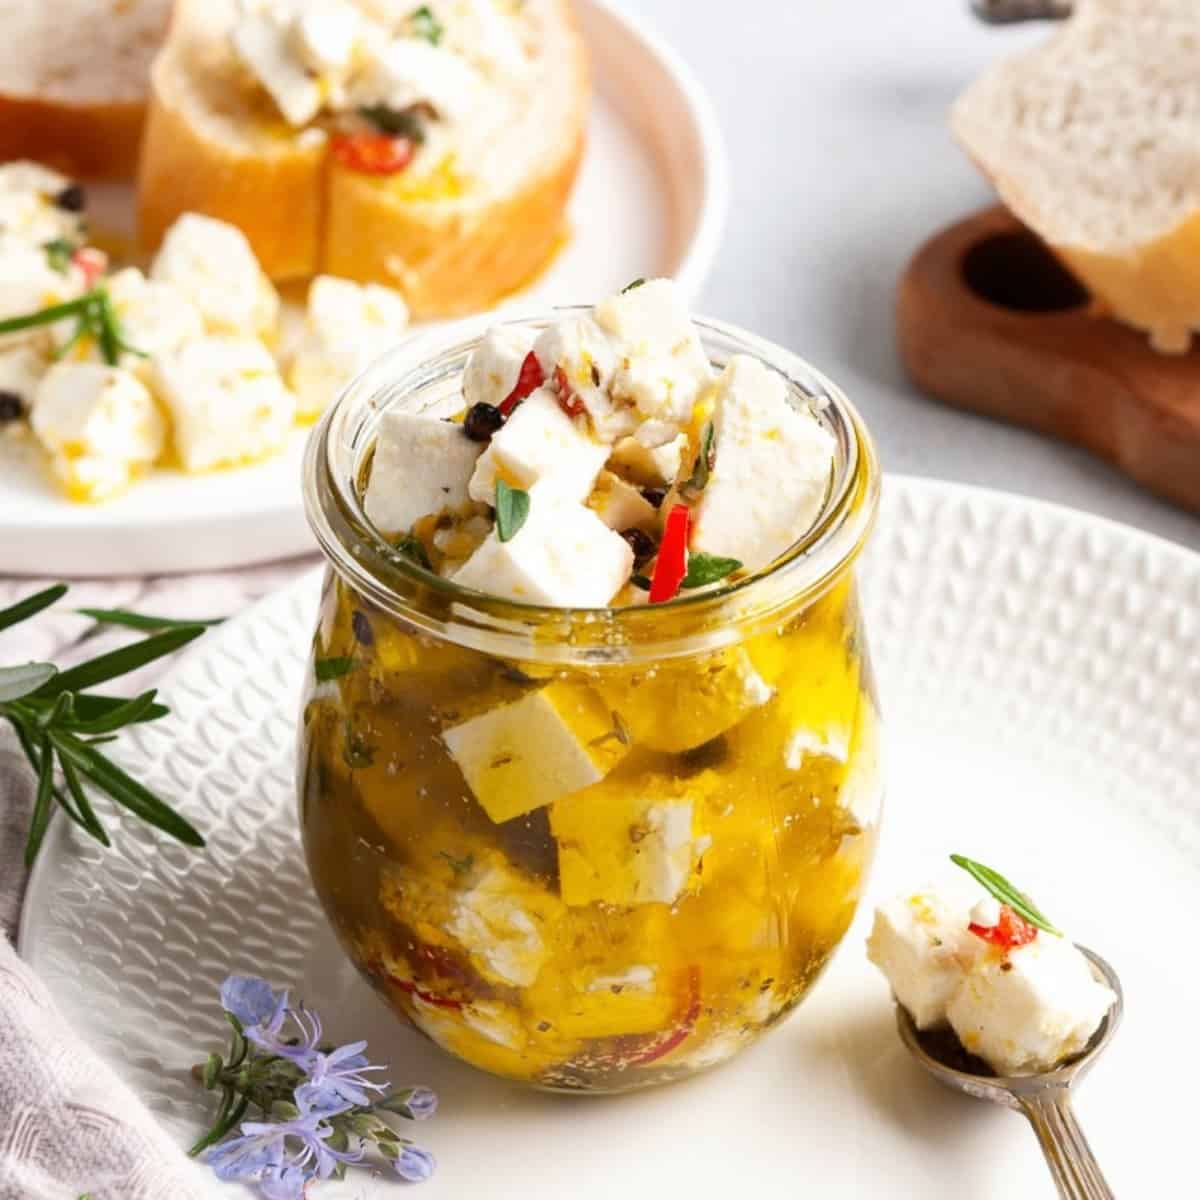 Marinated Olives and Feta Cheese - The Domestic Dietitian